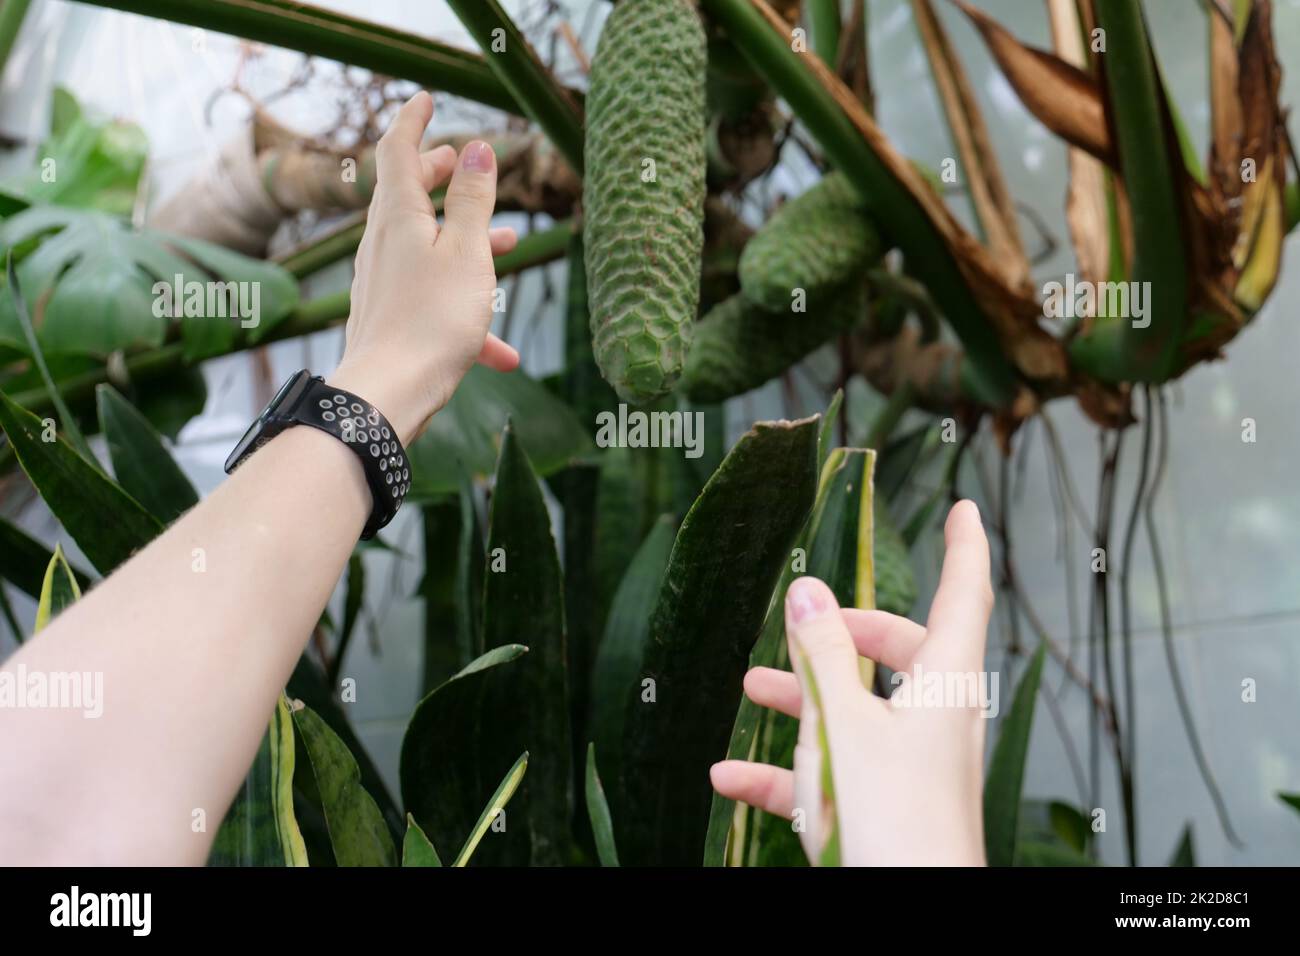 A hand holding a plant Stock Photo